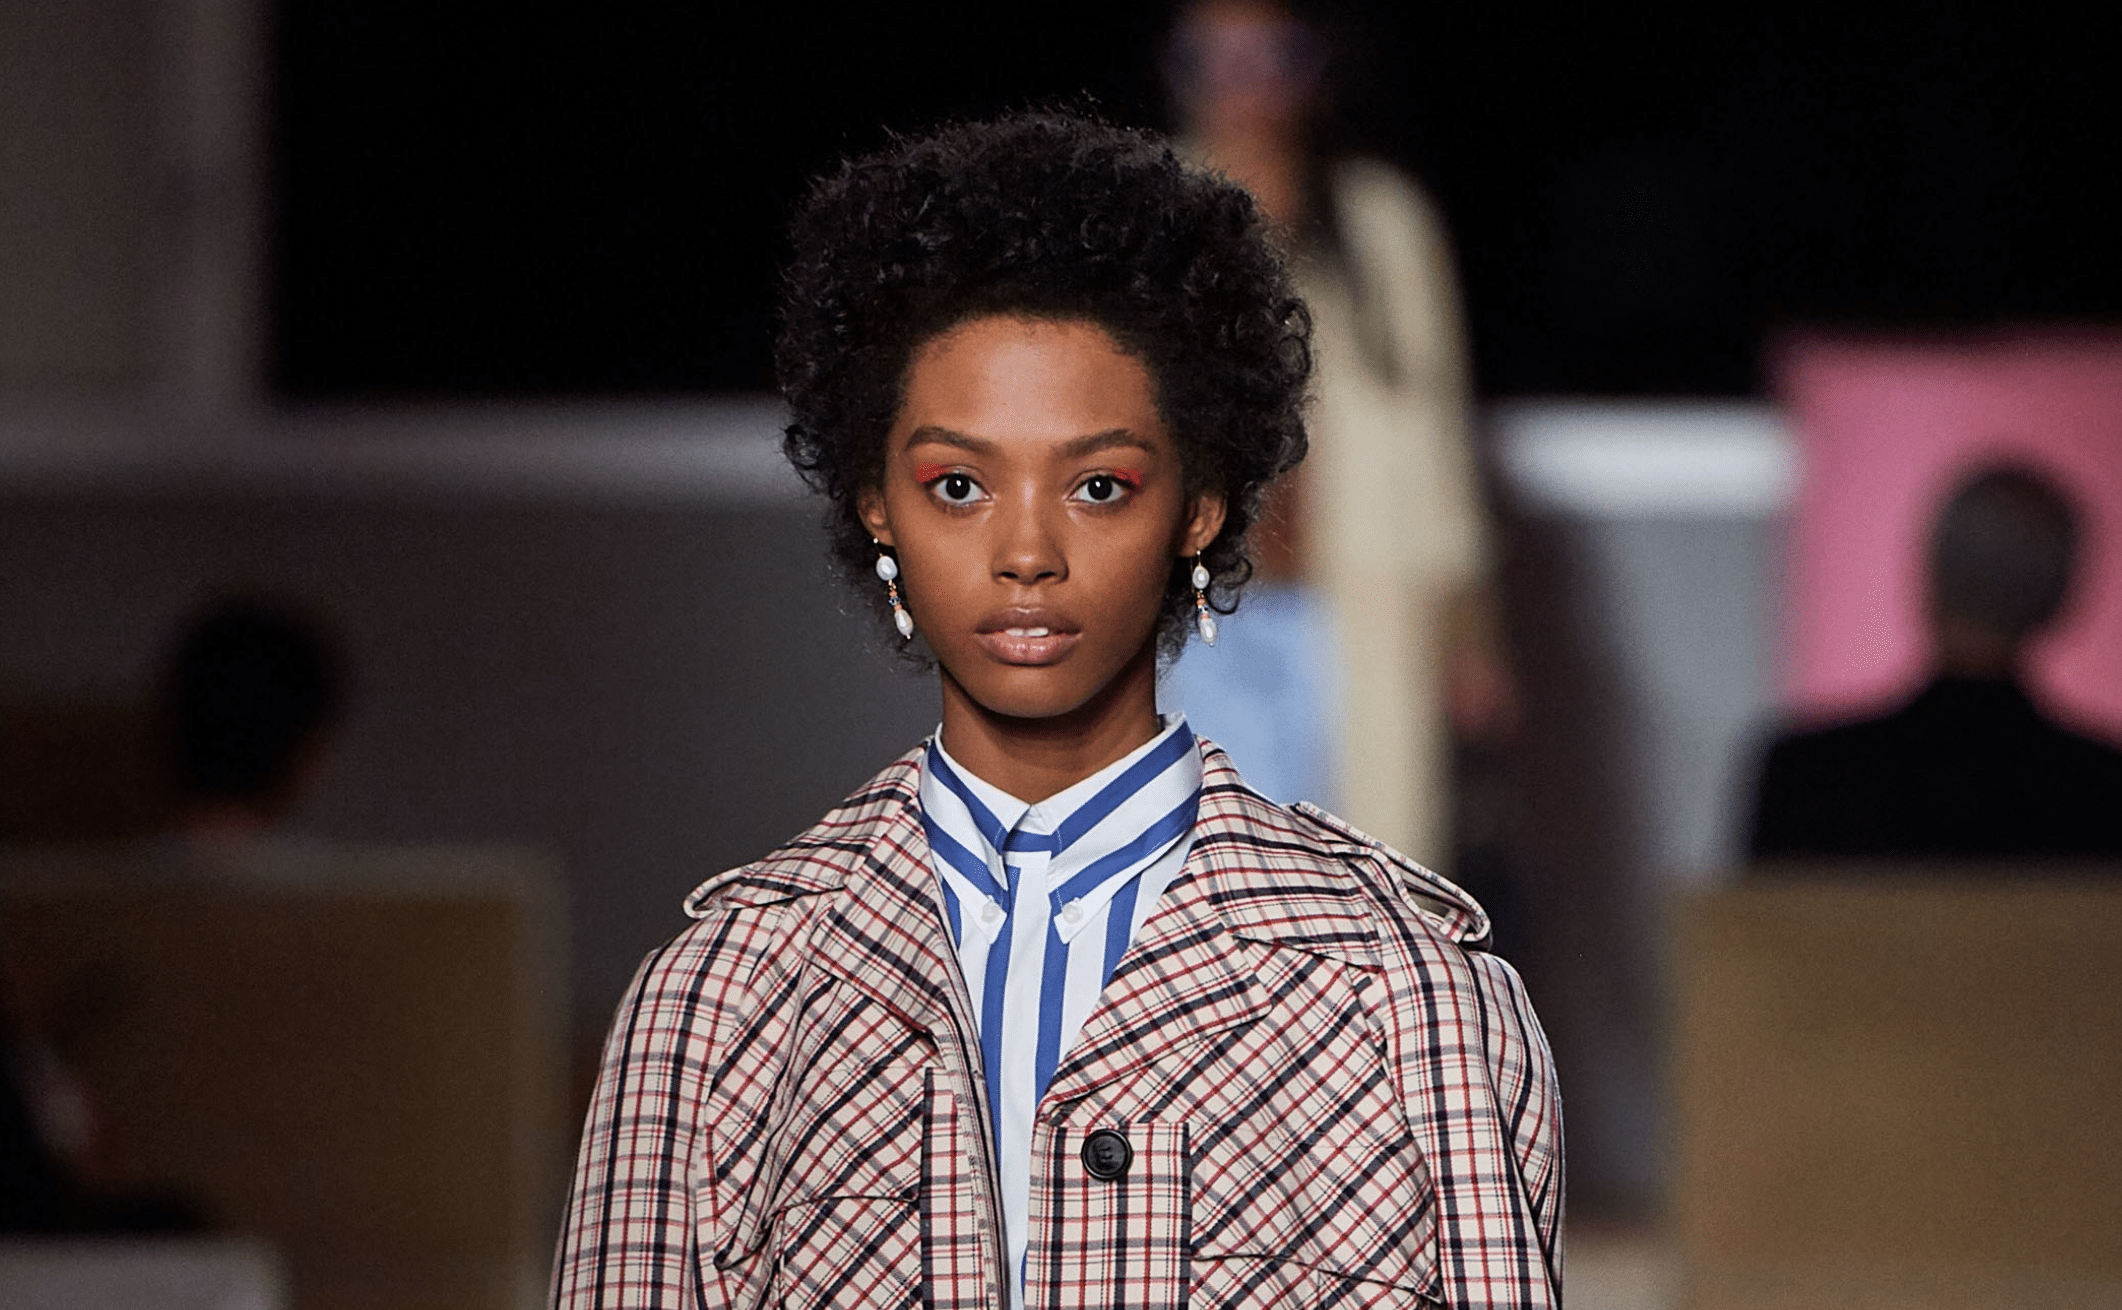 3 Trends From This Week's Resort Shows To Try Now